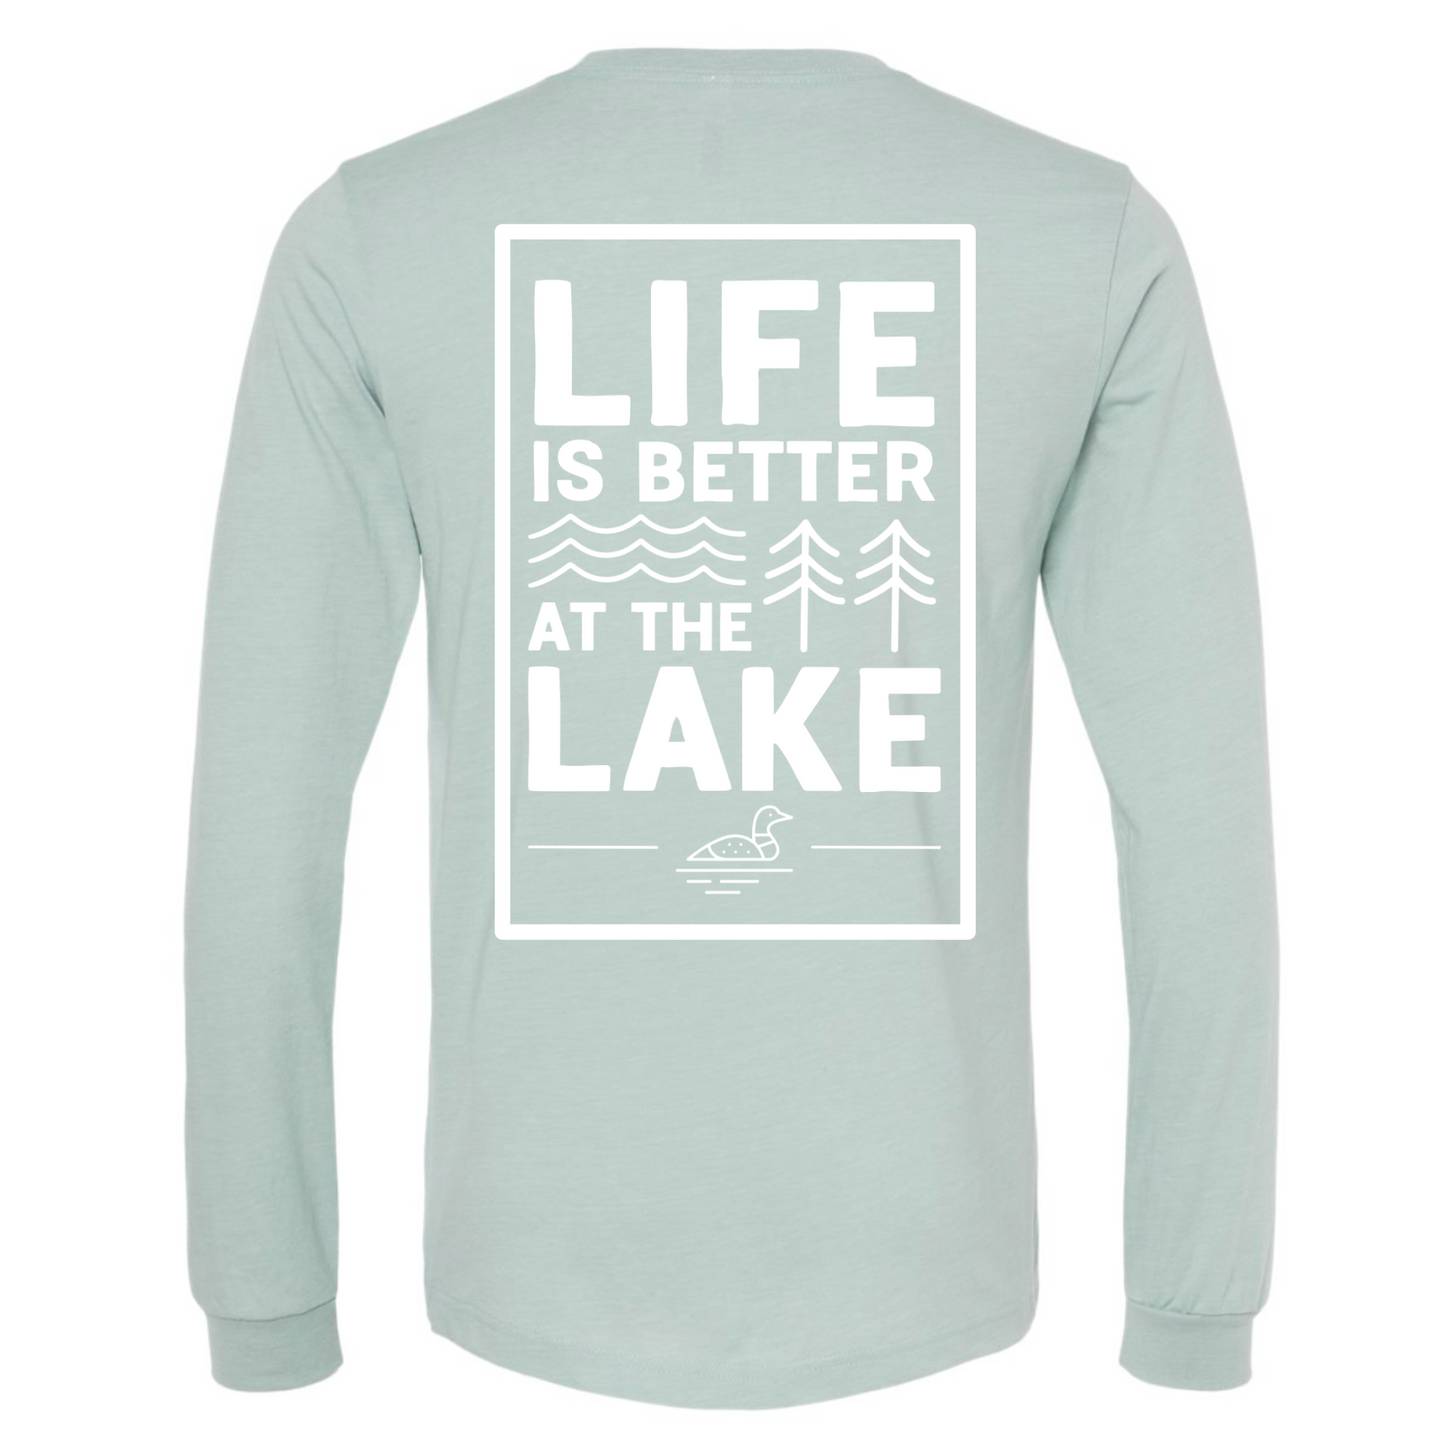 Life is Better at the Lake - Long Sleeve T-Shirt in heather dusty blue. The back of the shirt has a white design with the saying "Life is better at the lake" with lake waves, pine trees, and a loon all squared into a frame. The front has the saying "lake bum" with a lake wave and sun all boxed into a hexagon on the small square pocket (right). This is the back view of the shirt.